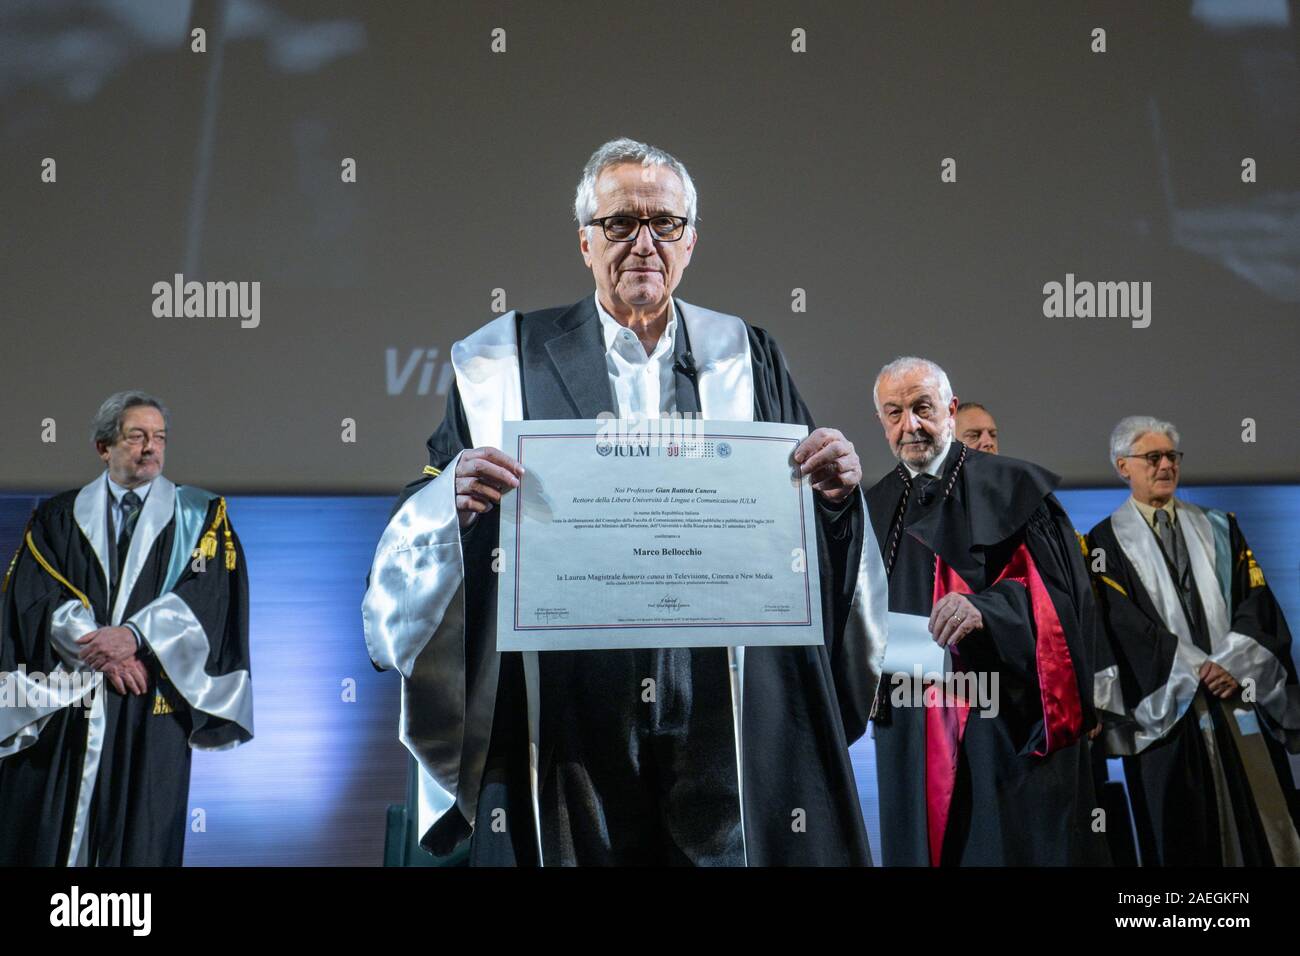 Milan, Italy. 9th Dec 2019. Ceremony of conferring the Master's Degree ad Honorem in Television, Cinema and New Madia to Marco Bellocchio at IULM University, Via Carlo Bo 7 Milan In the picture: Marco Bellocchio Editorial Usage Only Credit: Independent Photo Agency Srl/Alamy Live News Stock Photo